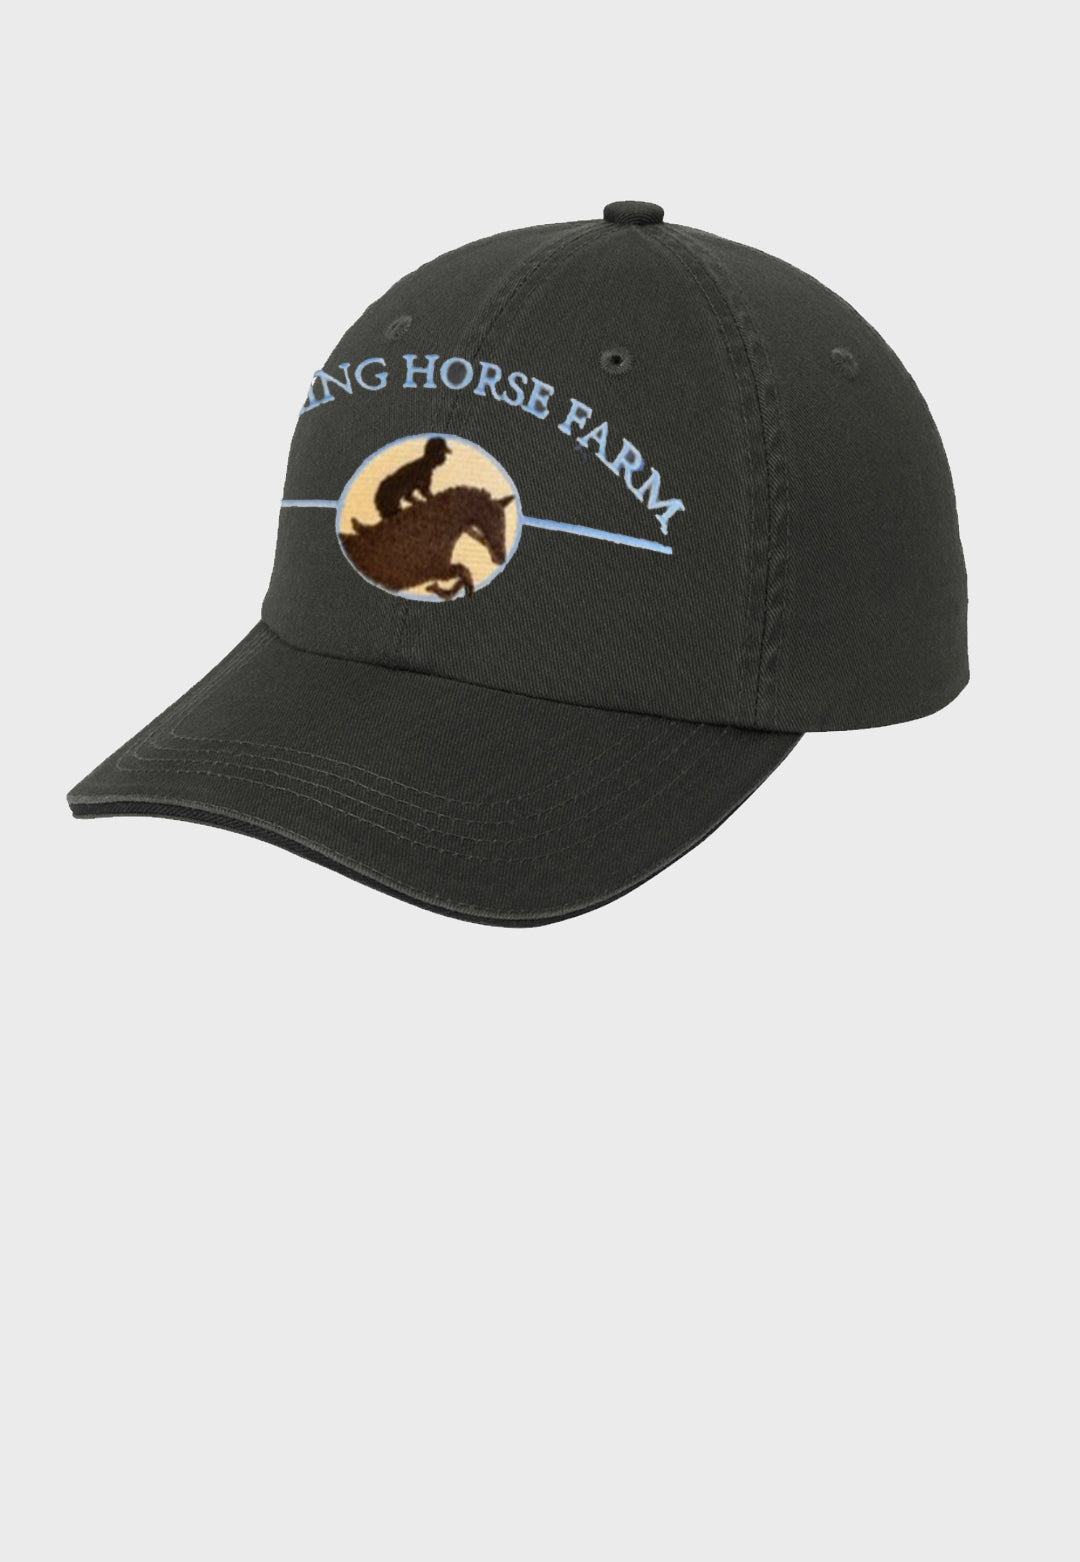 Smiling Horse Farm Port Authority® Sandwich Bill Cap with Striped Closure